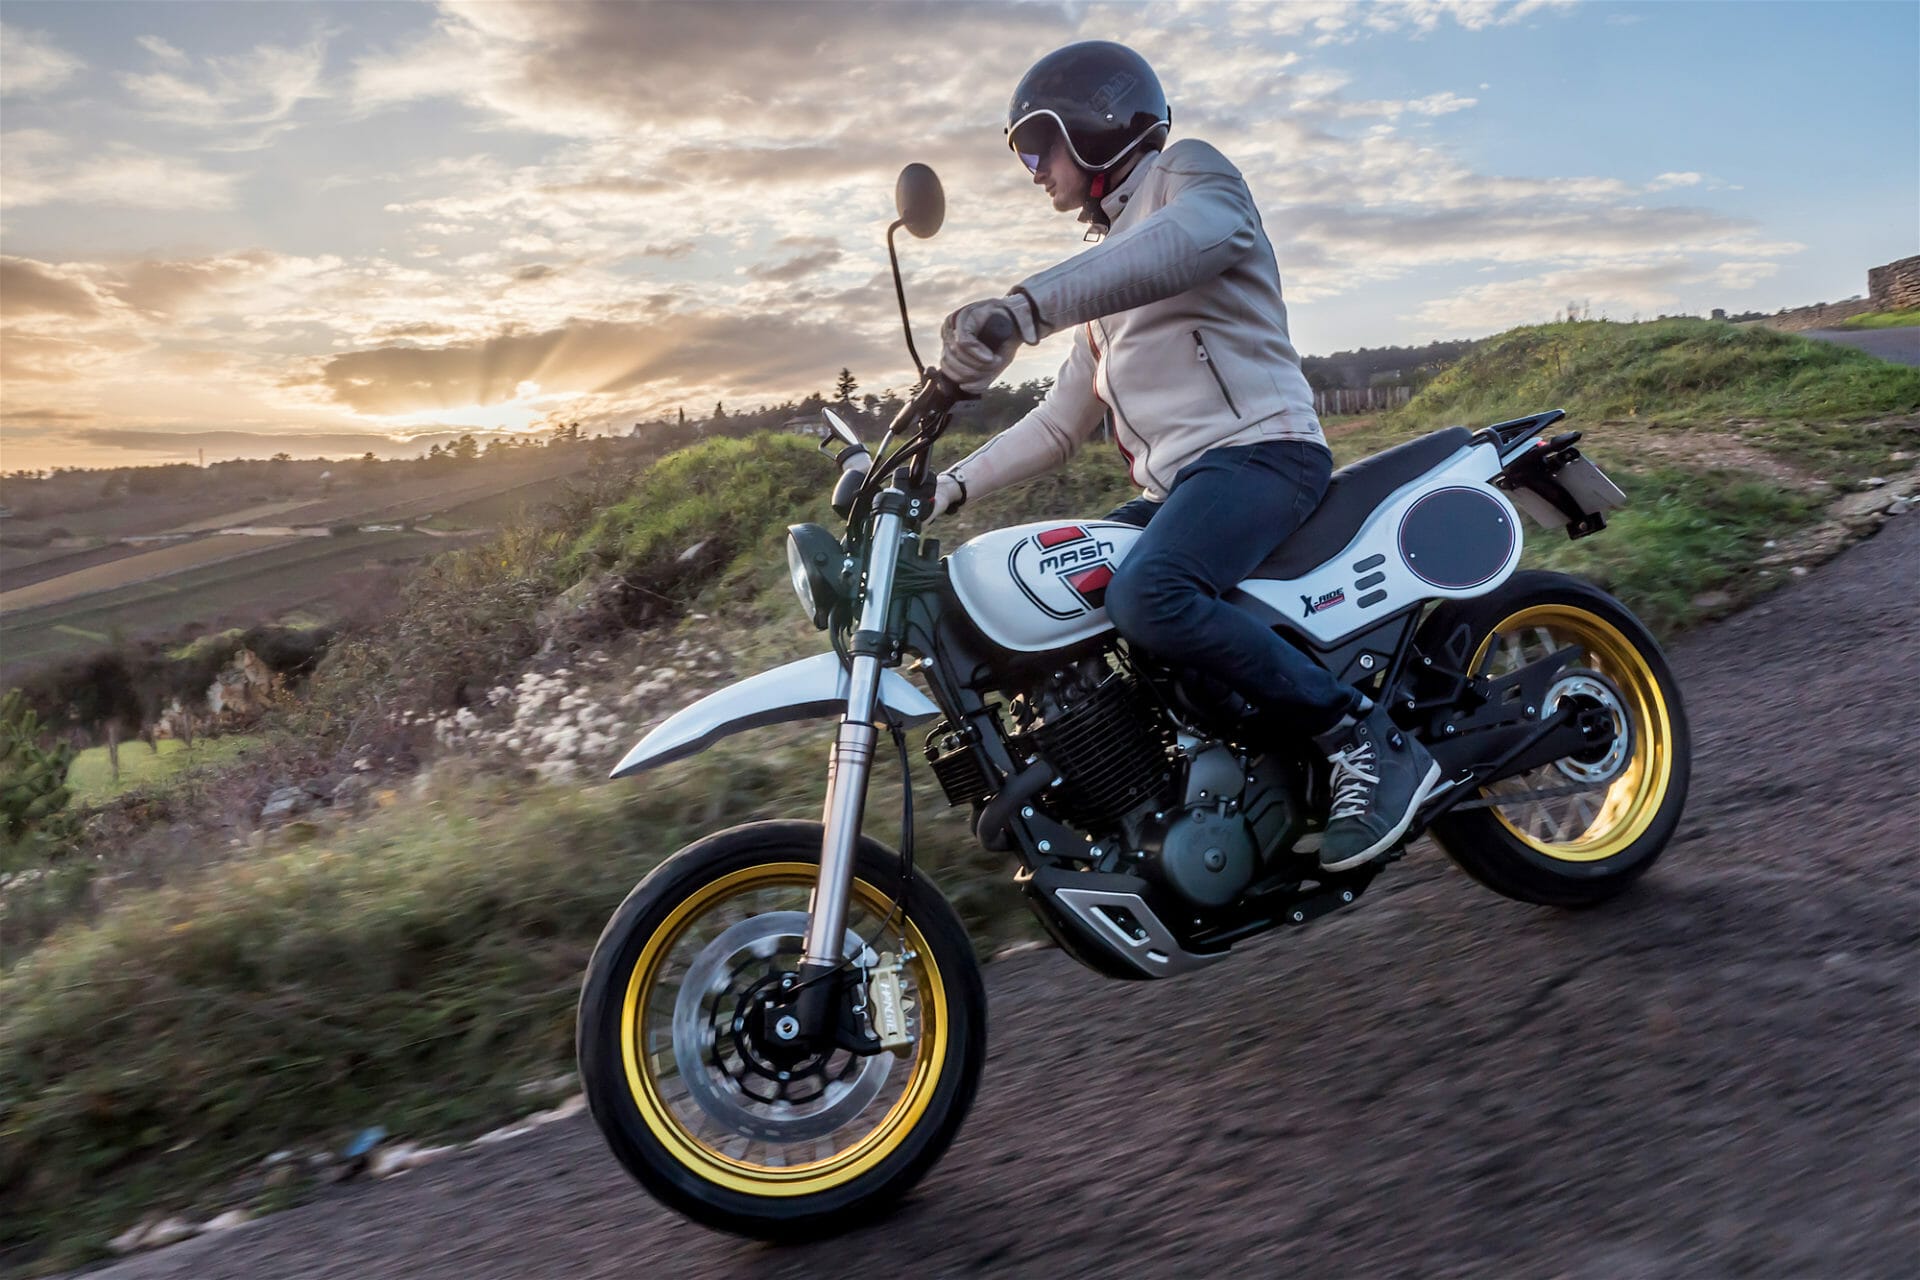 Mash gets new sales partner
- also in the App MOTORCYCLE NEWS